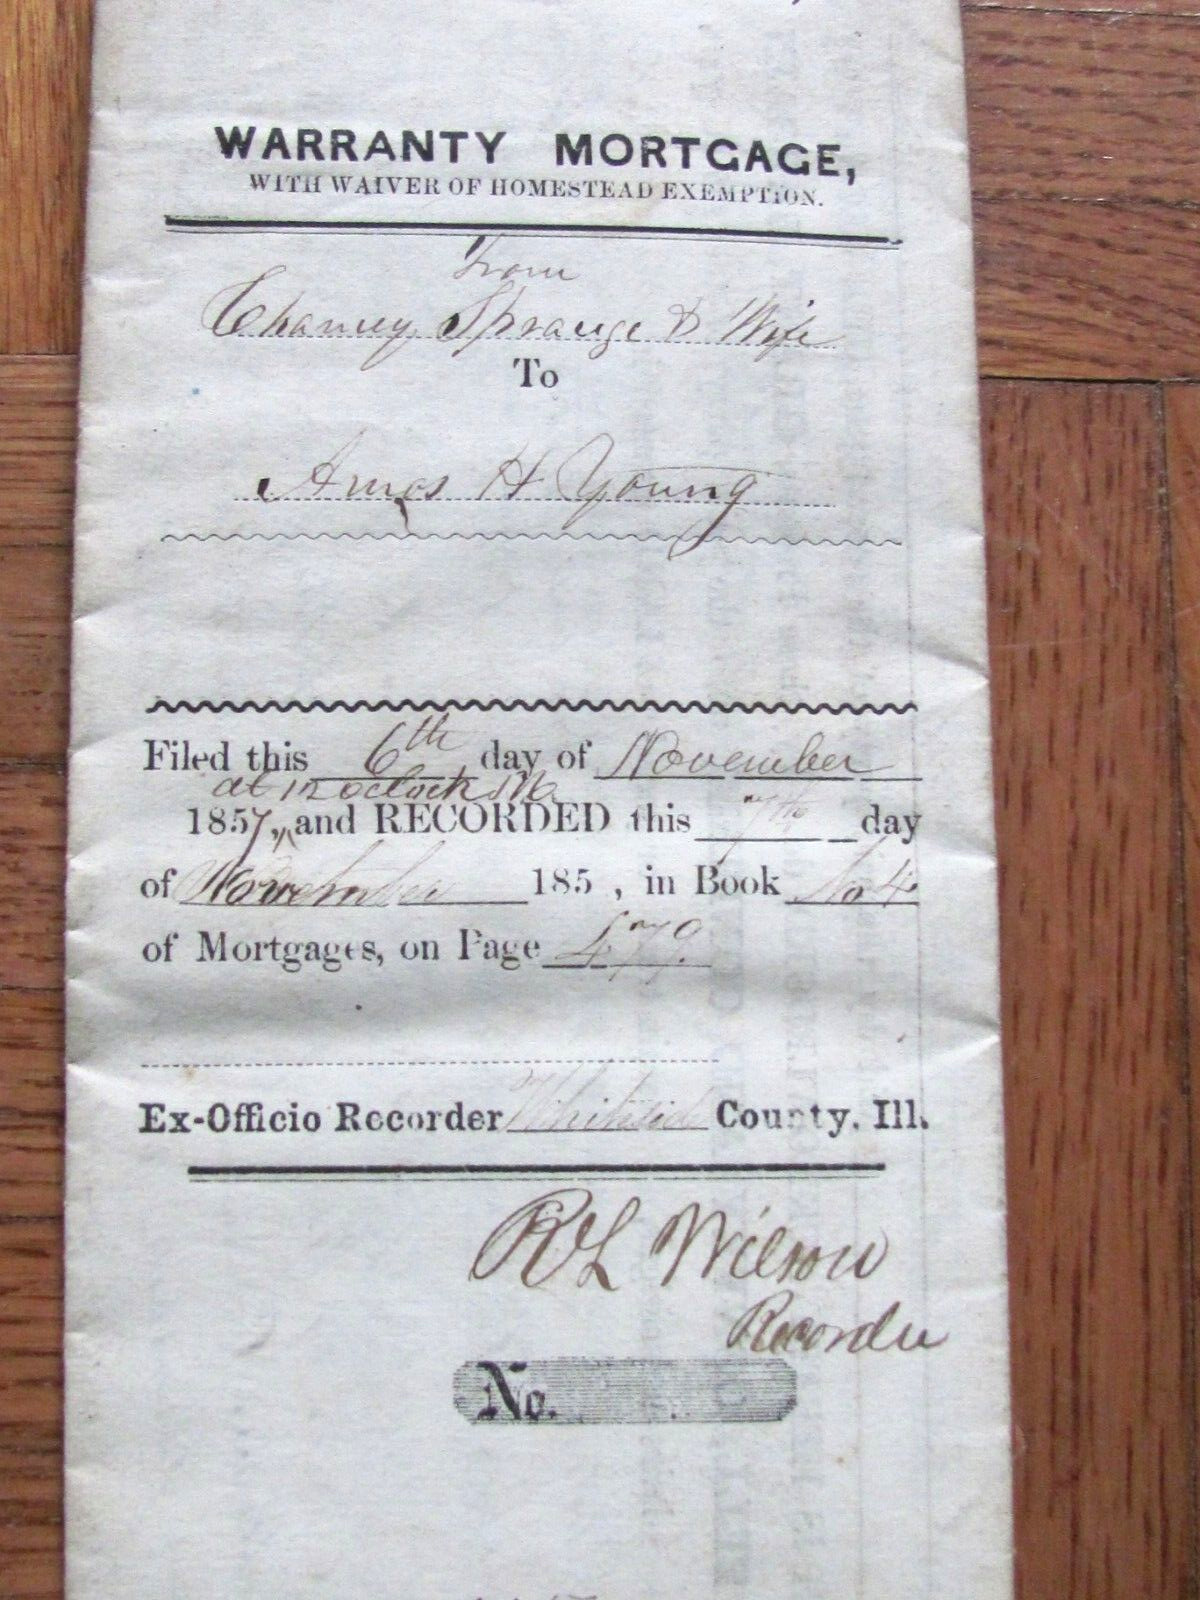 1857 PROPERTY LAND DEED PROPHETSTOWN IL CHAUNCY SPRAGUE TO AMOS H YOUNG